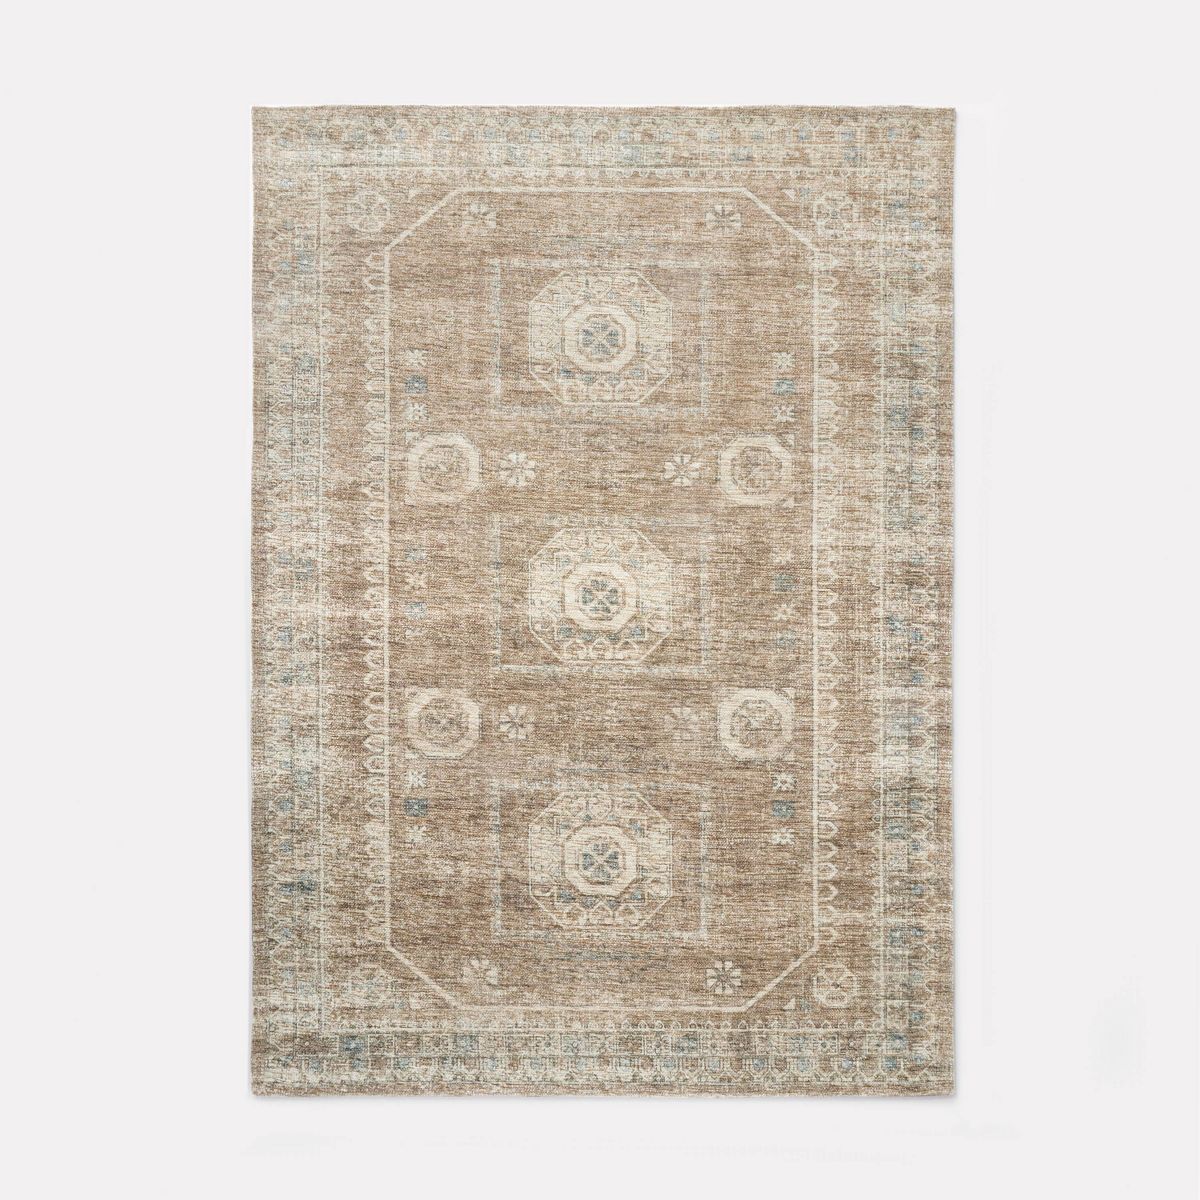 5'x7' Distressed Persian Woven Area Rug Brown - Threshold™ designed with Studio McGee | Target